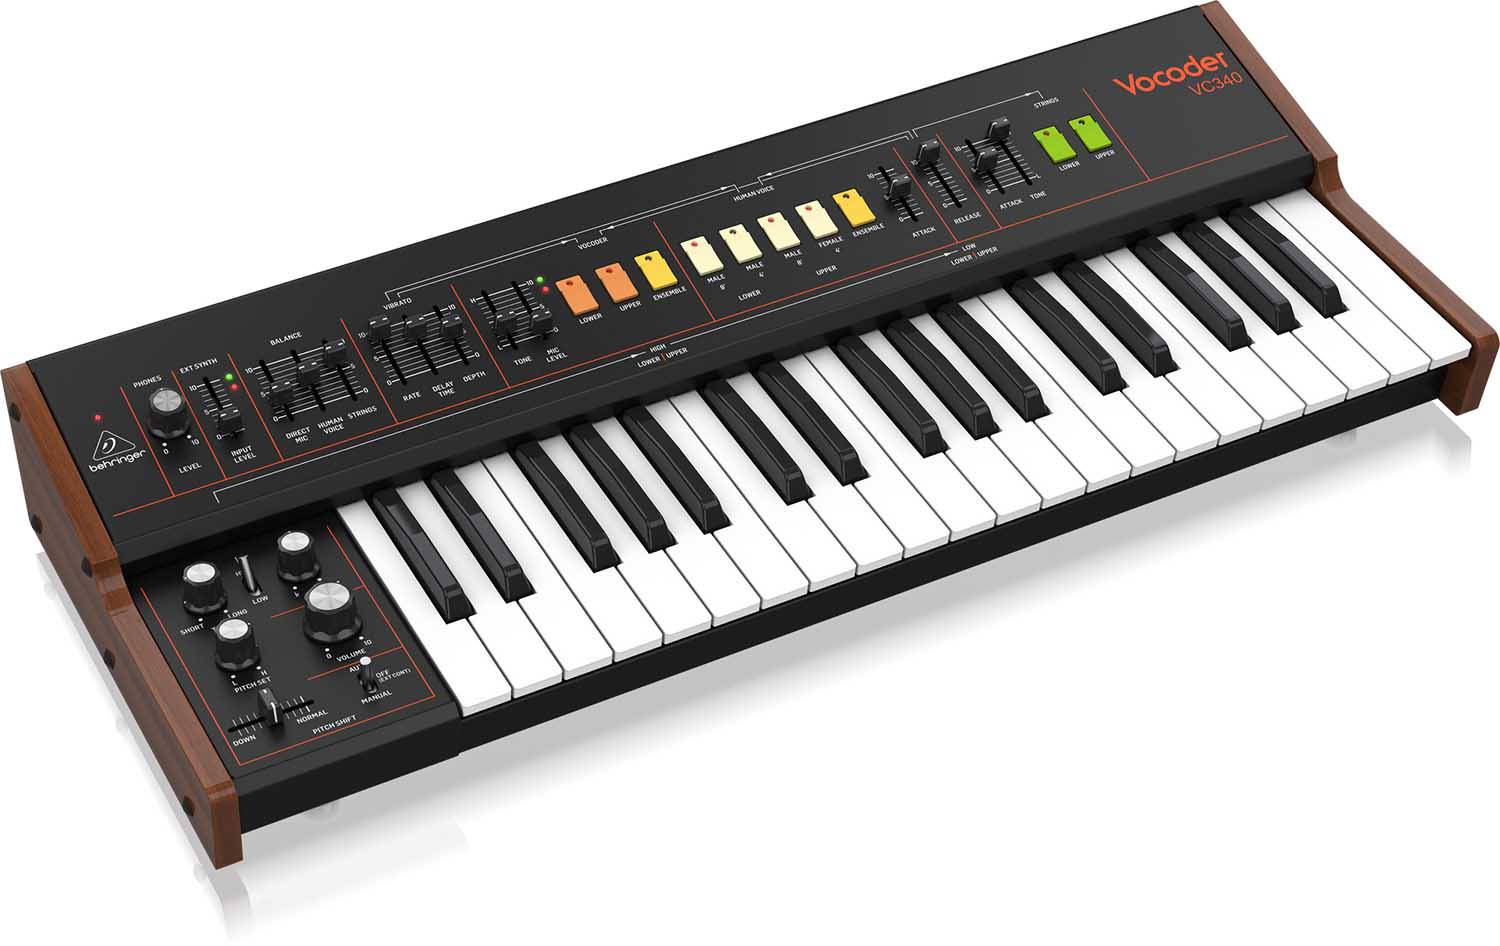 Behringer VOCODER VC340, Authentic Analog Vocoder For Human Voice and Strings - Hollywood DJ